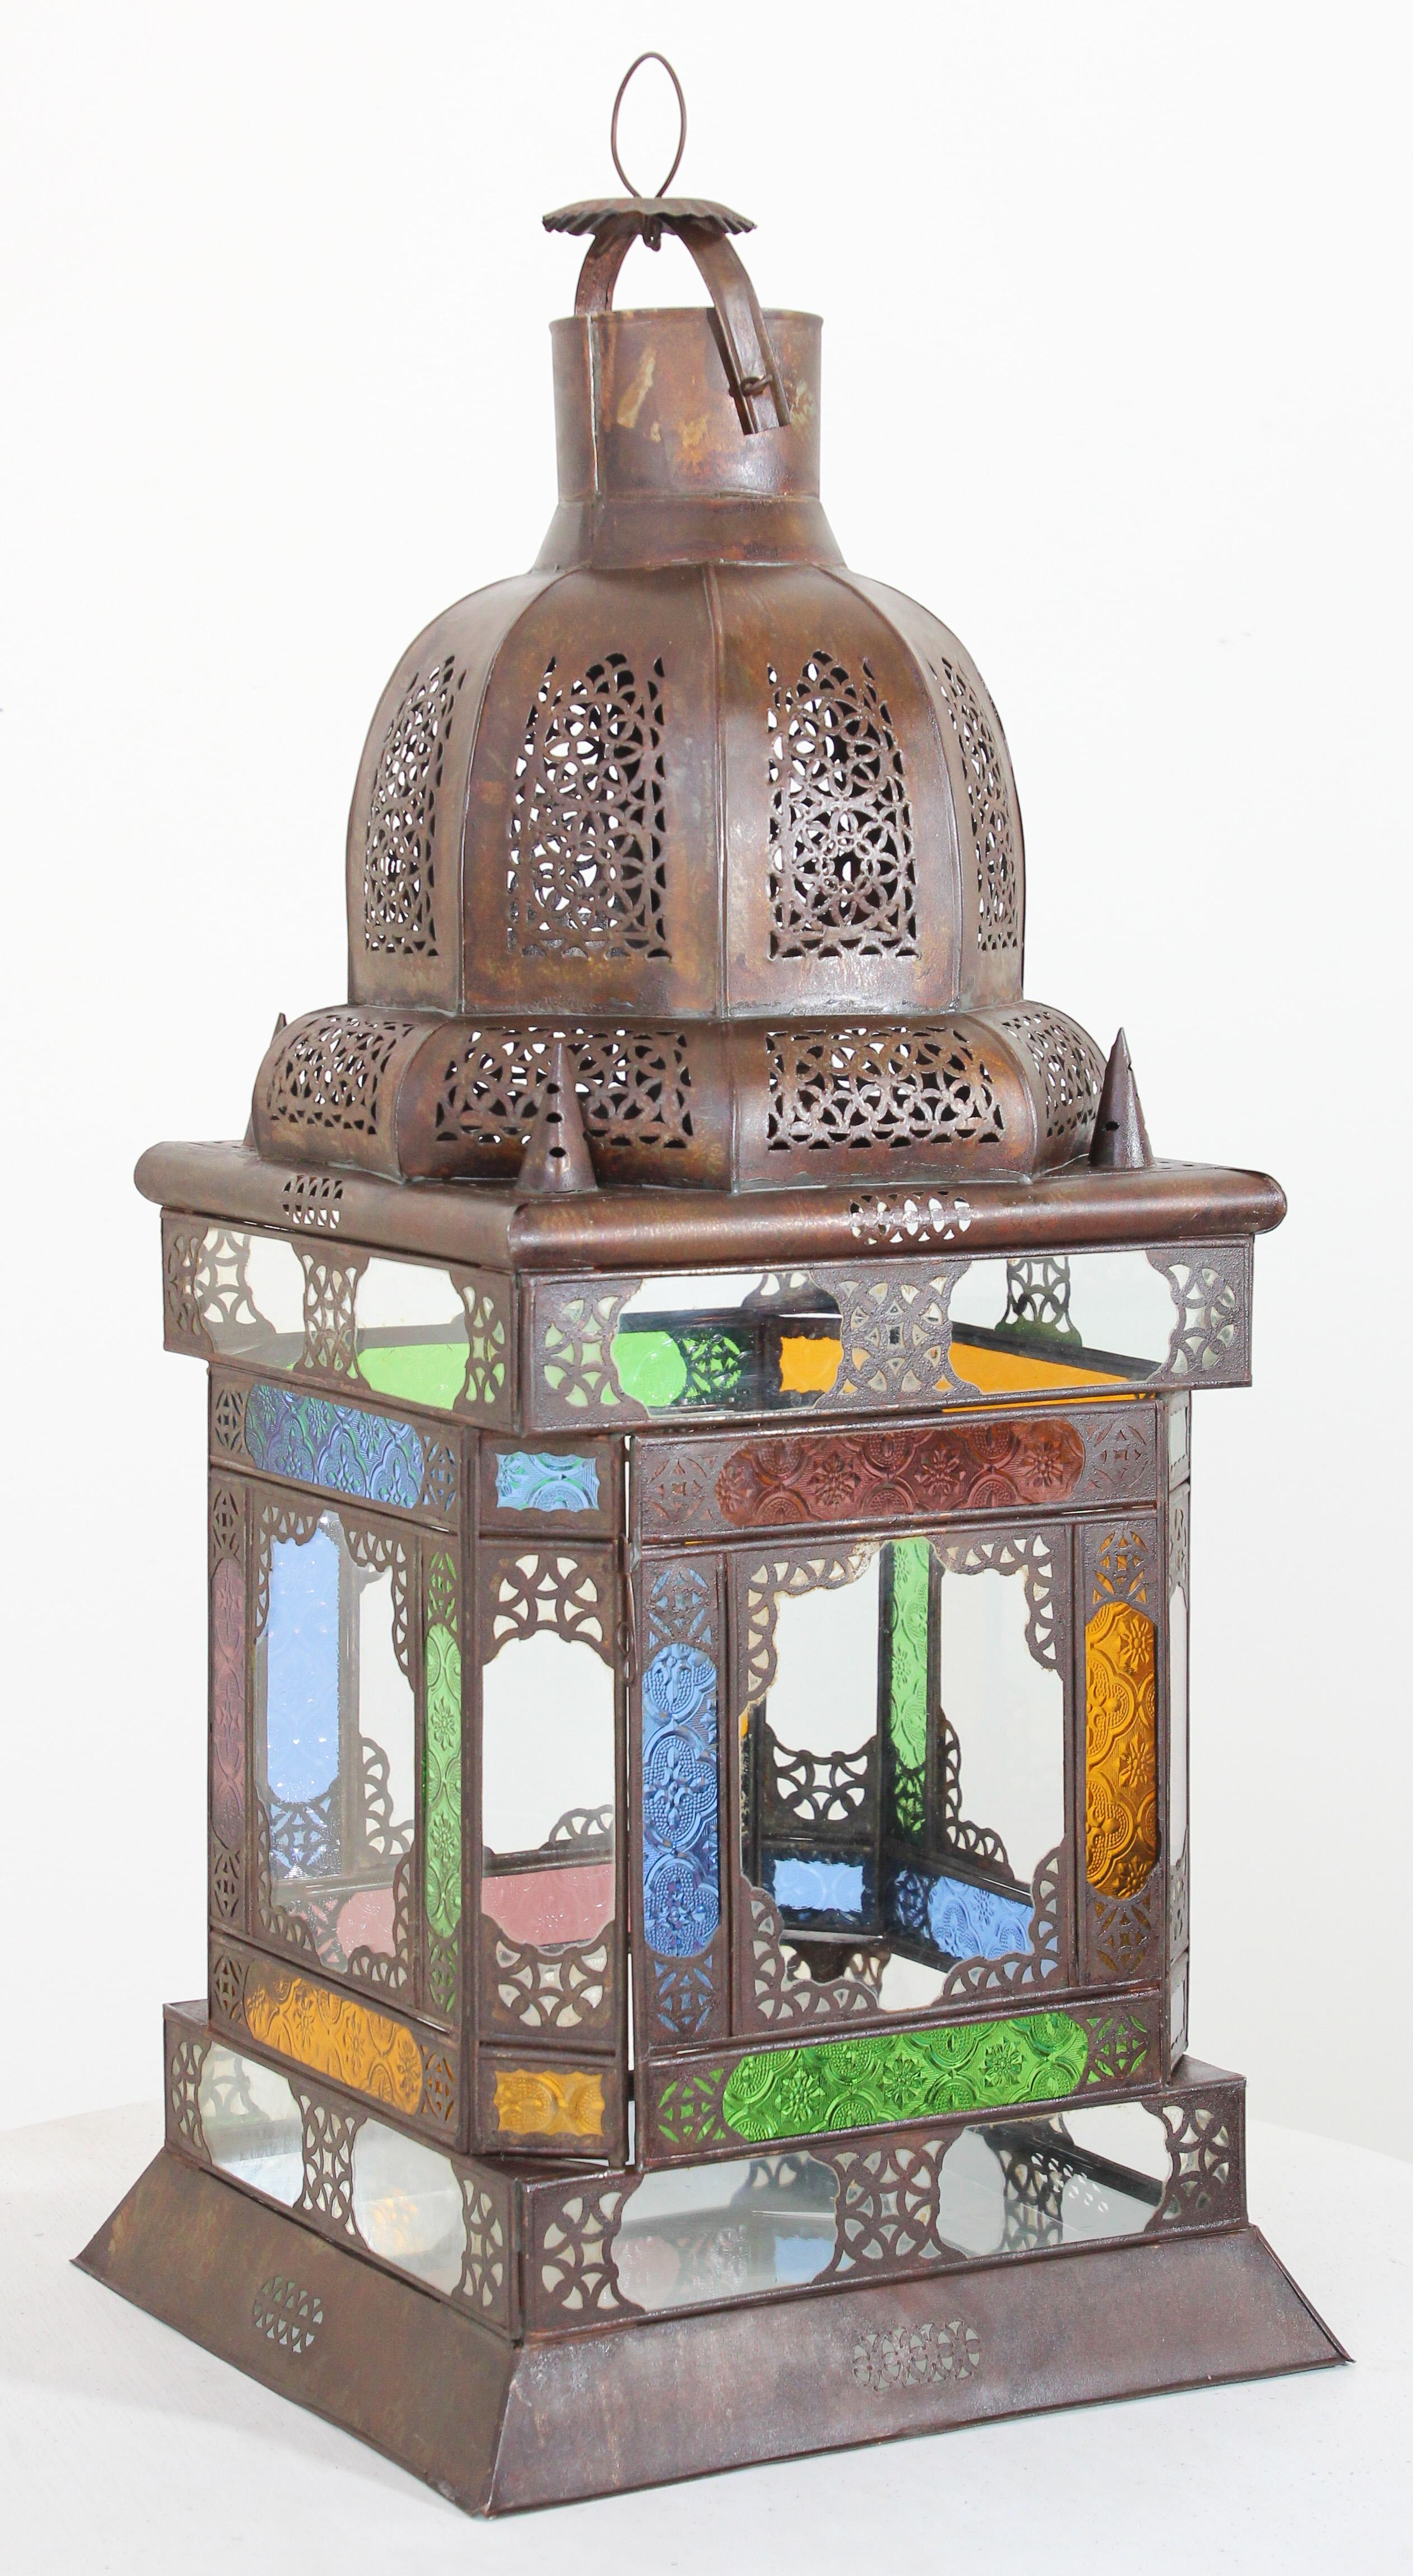 Vintage Moroccan metal lantern with multicolor glass.
Large glass Moroccan lantern with Moorish design.
Square shape elegant impressive intricate pierced metal and glass Moroccan Lantern,
29 inches tall with clear, blue, green, red and gold blown